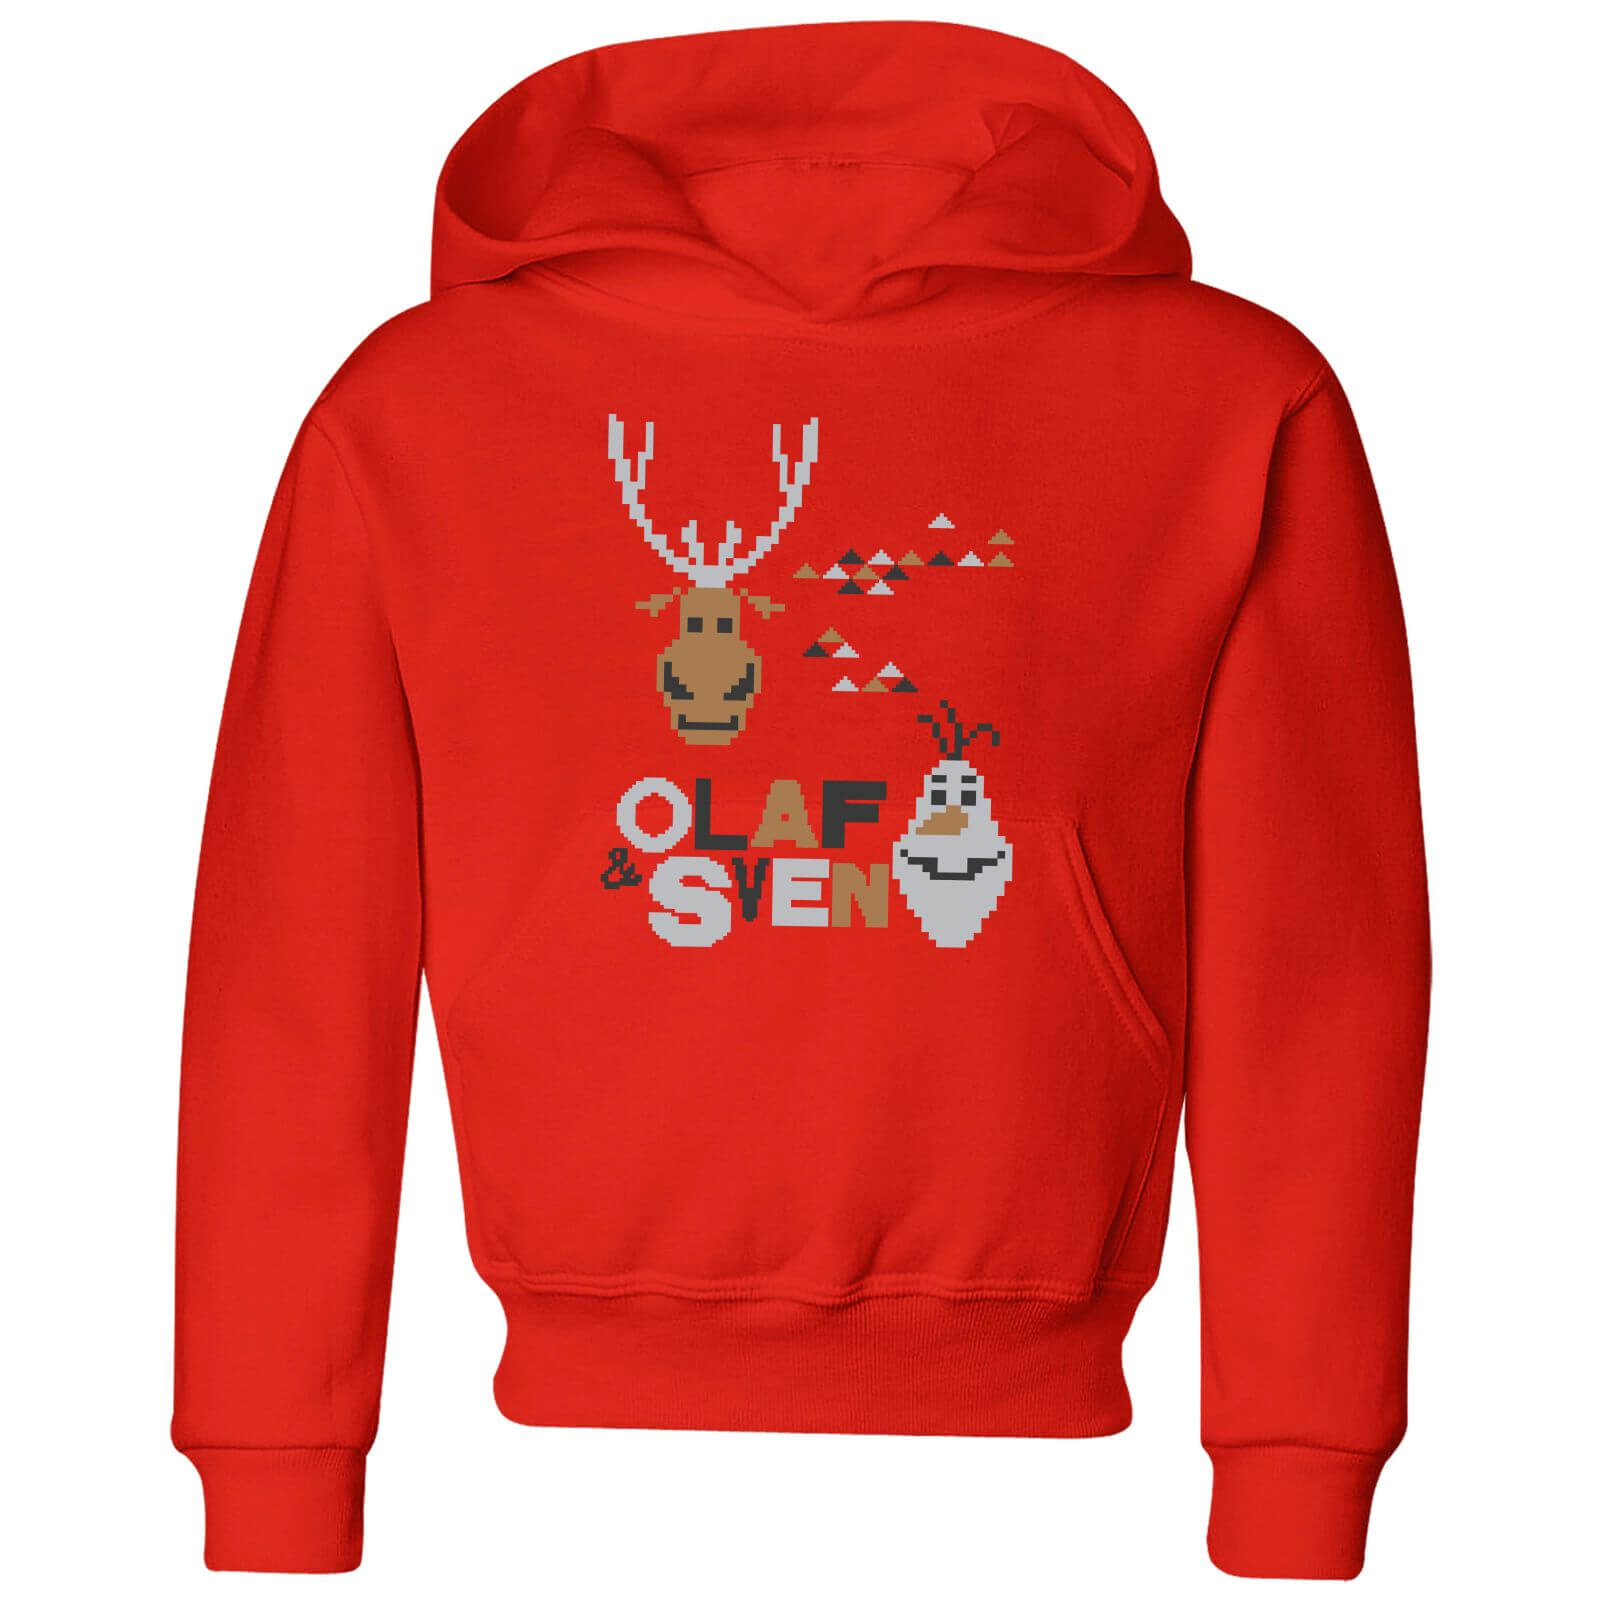 Disney Frozen Olaf and Sven Kids' Christmas Hoodie - Red - 11-12 Jahre